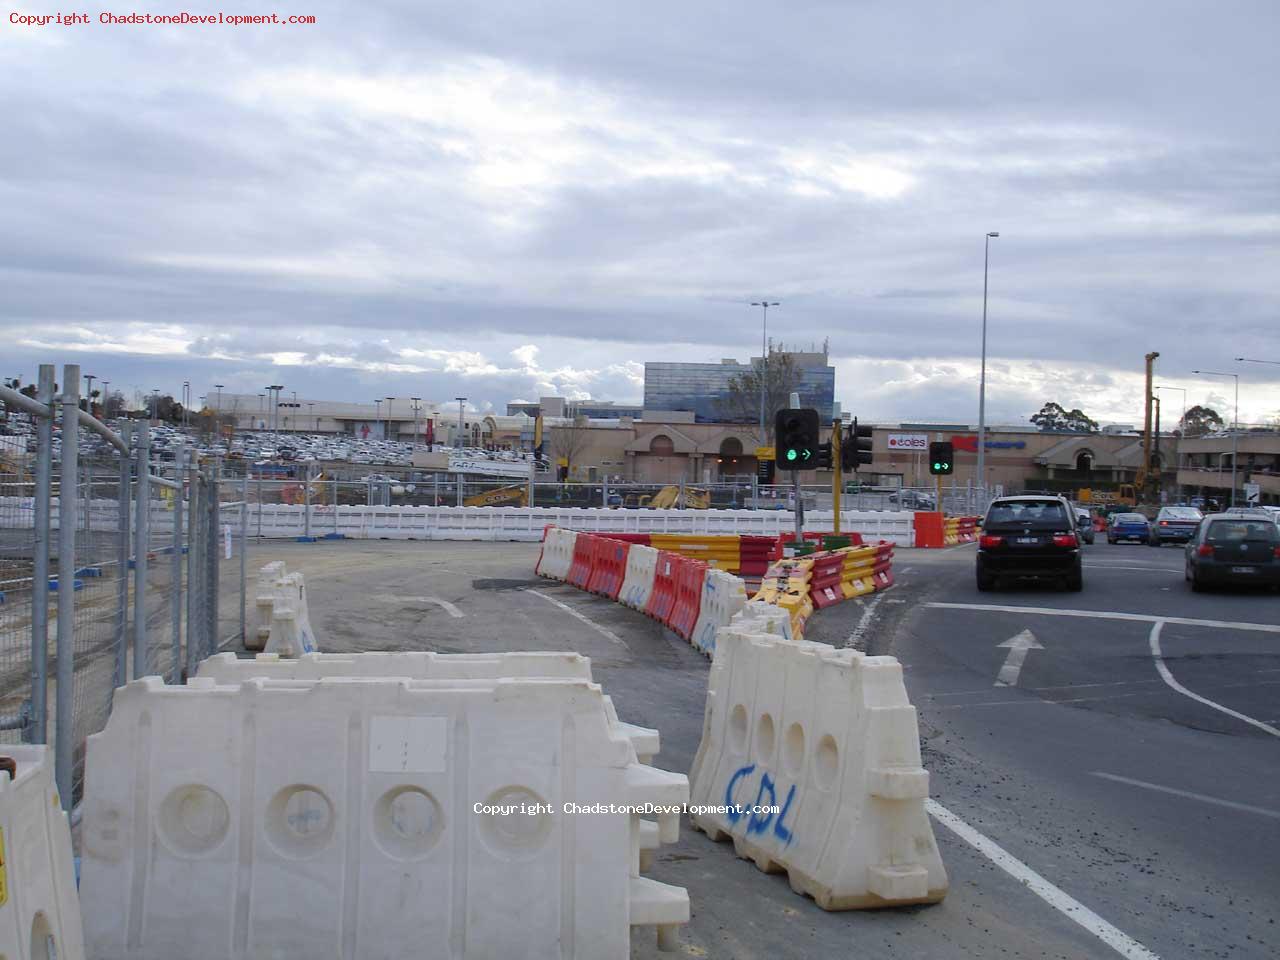 Temporary slip lane to new perimiter road (not yet open) - Chadstone Development Discussions